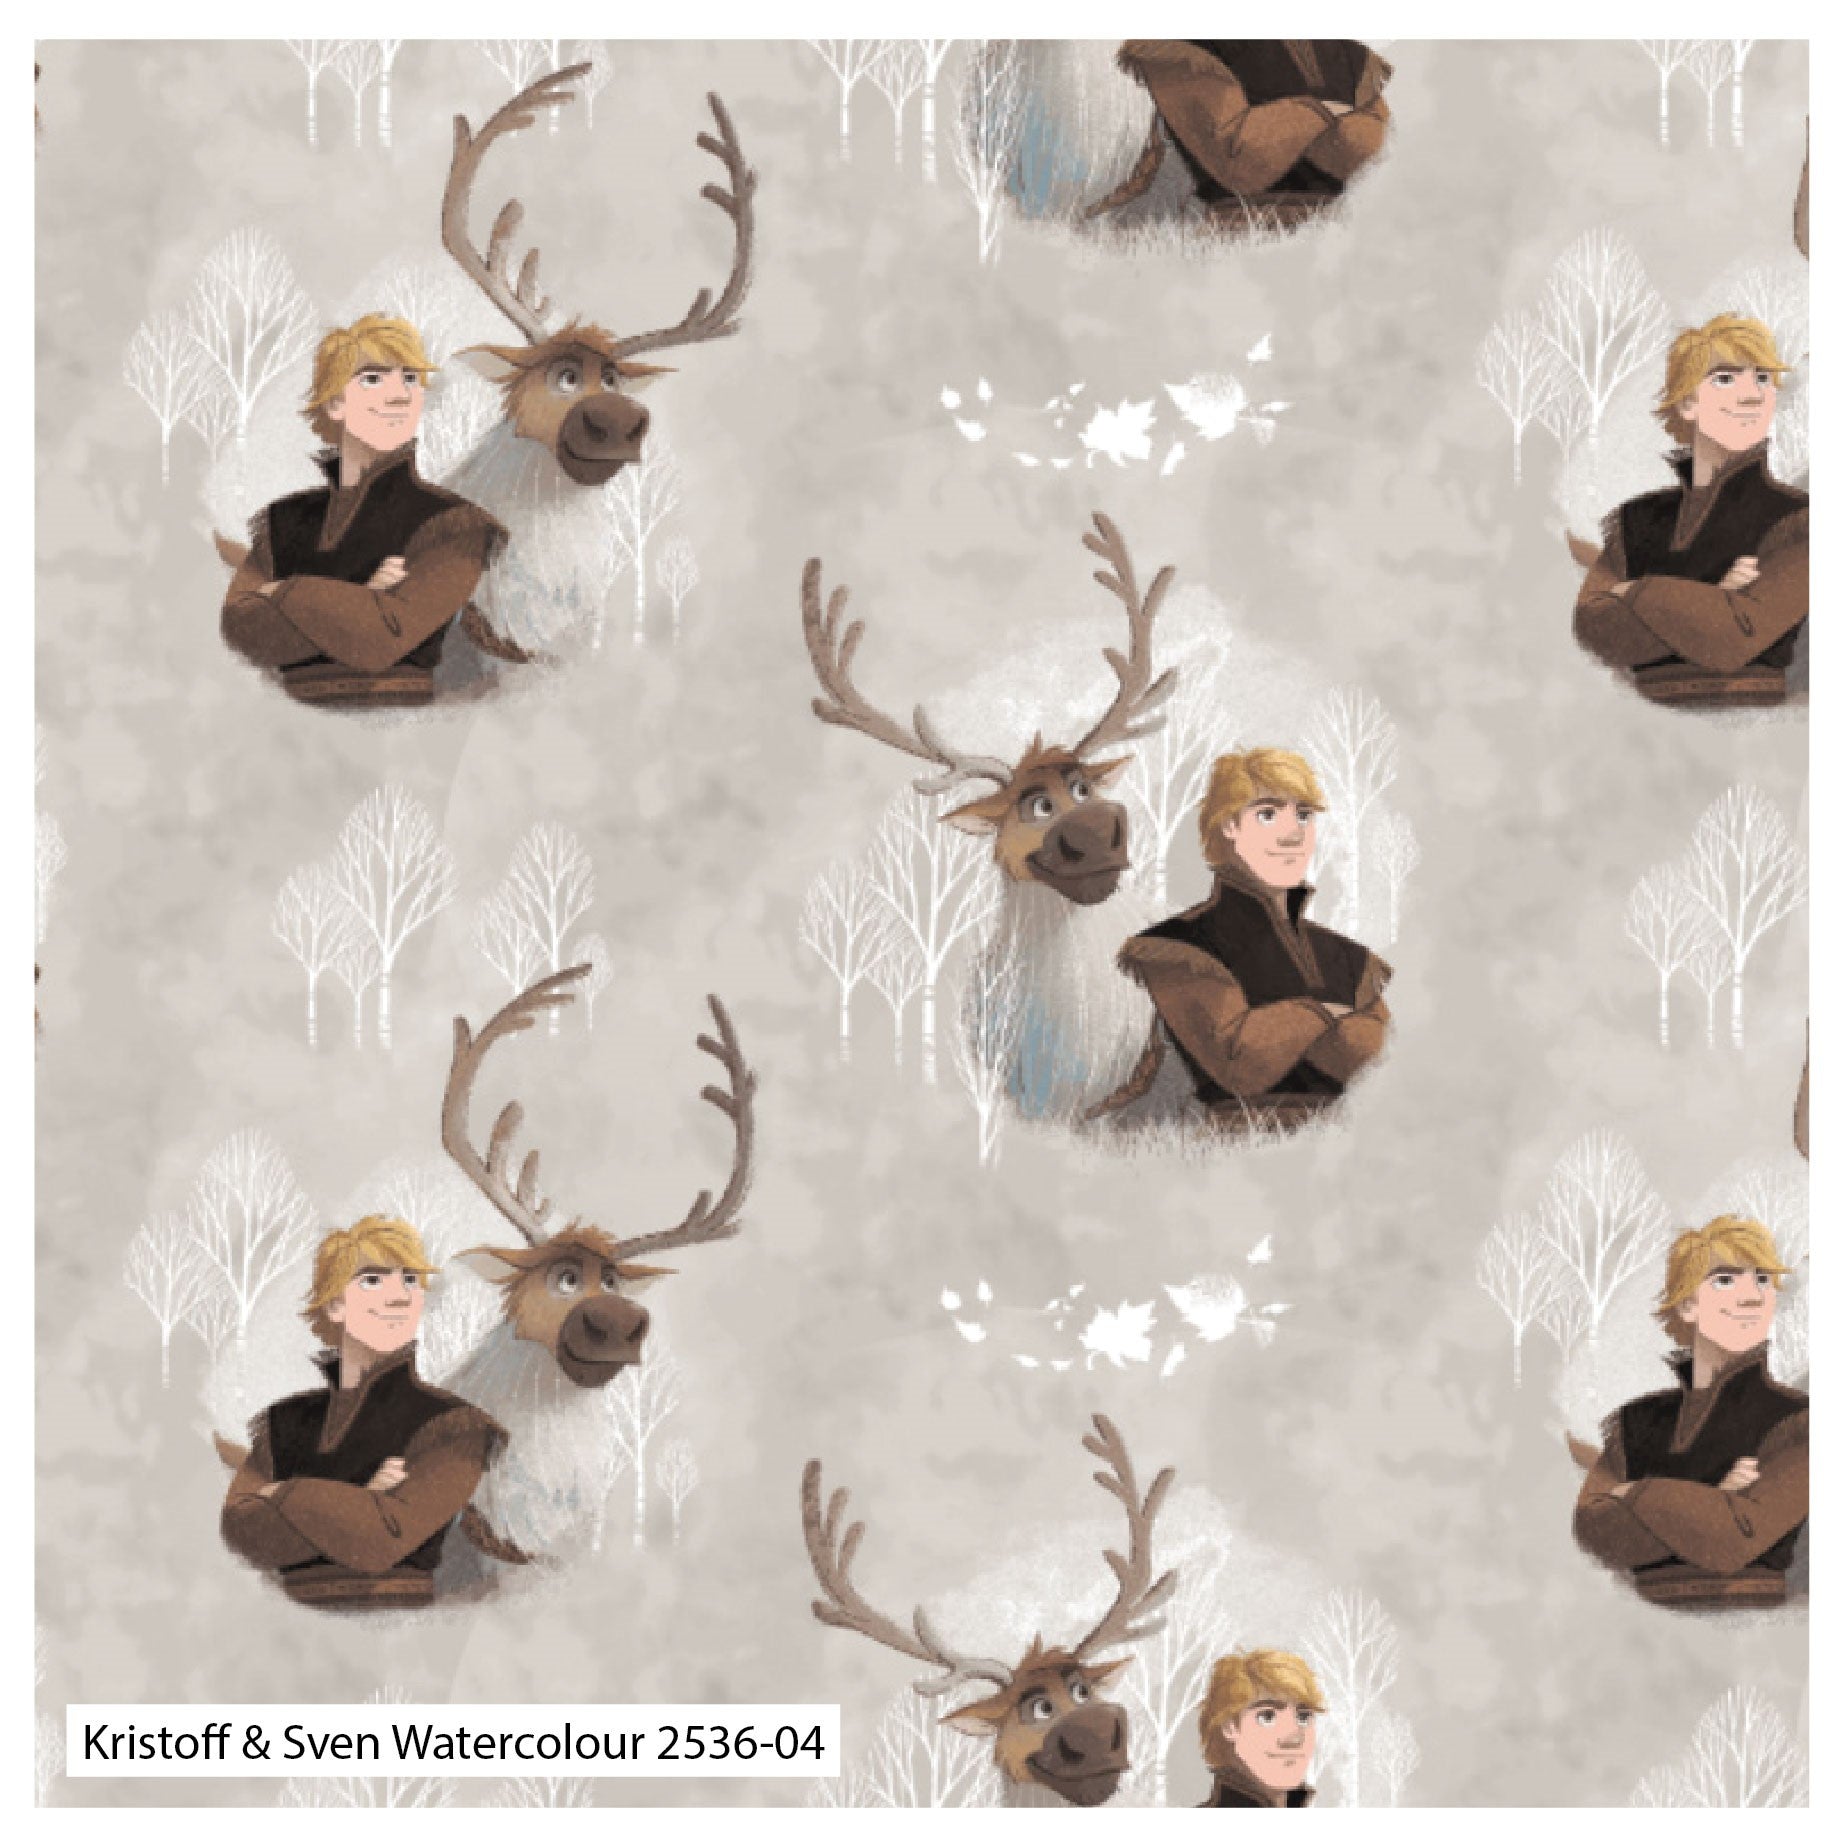 Frozen 2 Fabric Collection - Kristoff and Sven